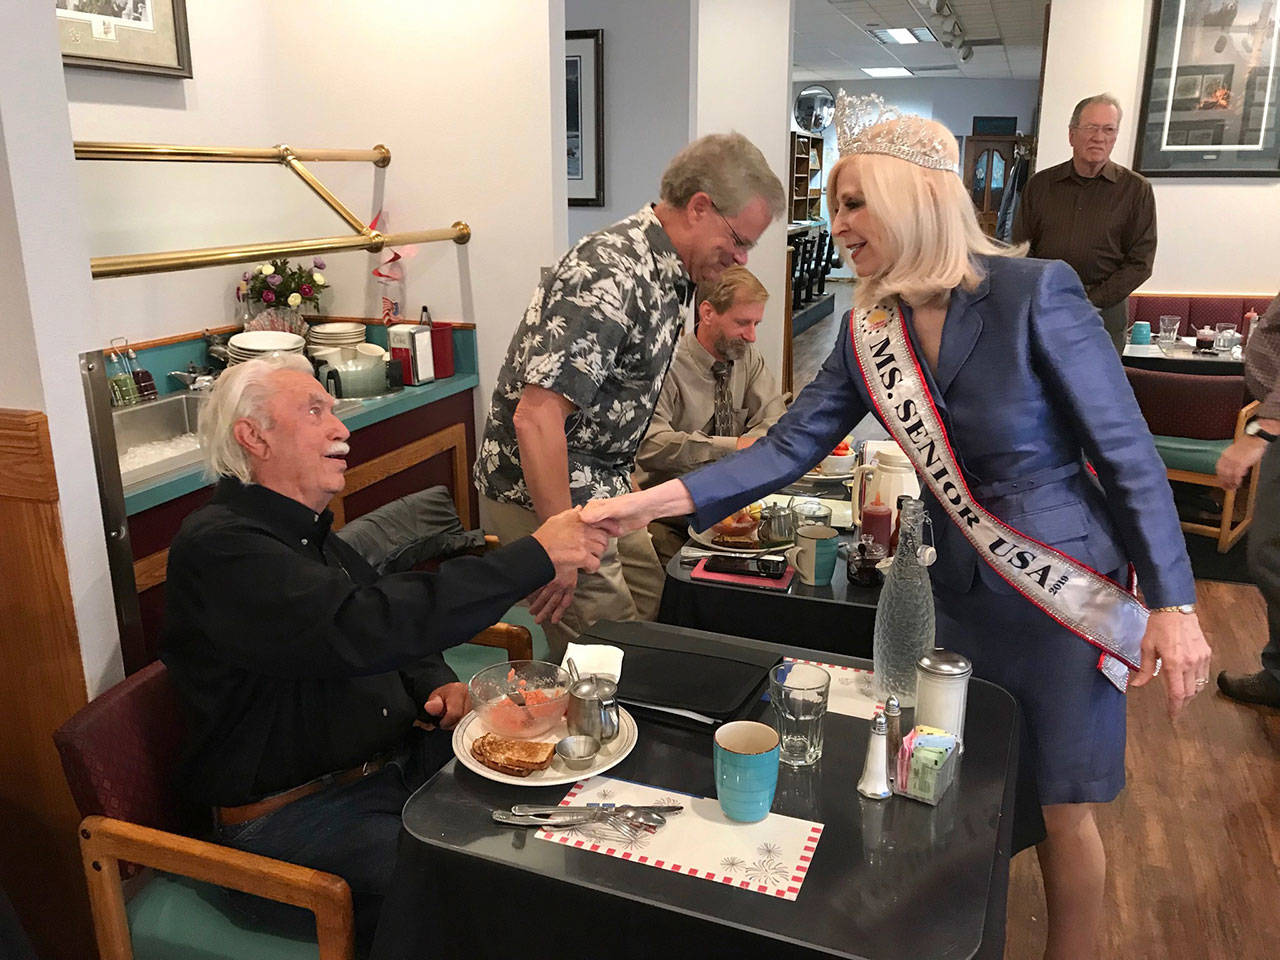 Newly named Ms. Senior USA Cherie Kidd of Port Angeles, a member of the Port Angeles Business Association, greets incumbent Clallam Fire District 2 Commissioner Richard Ruud and primary election challengers Steve Hopf, center, and Keith Cortner, right, at a PABA voter forum Tuesday. (Paul Gottlieb/Peninsula Daily News)